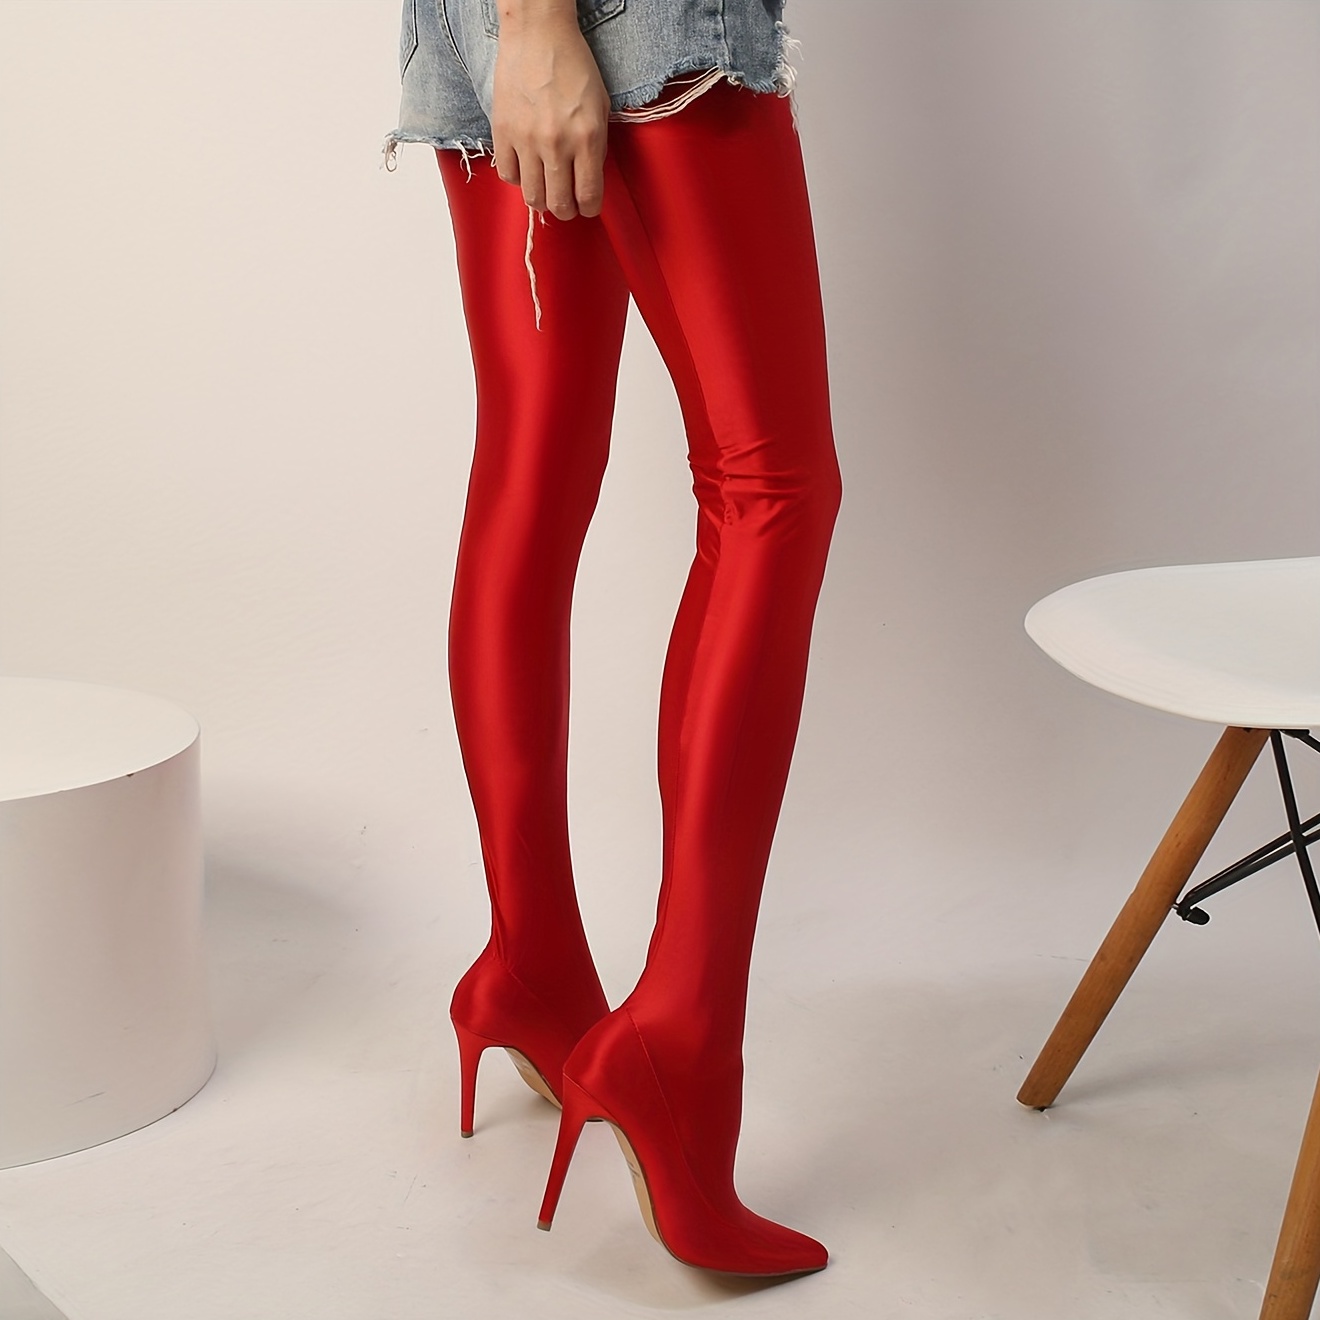 Women's Glossy Lycra Leggings Stiletto Booties, Comfy Pointed Toe Slip On  Heels, Women's Fashion Red Boots